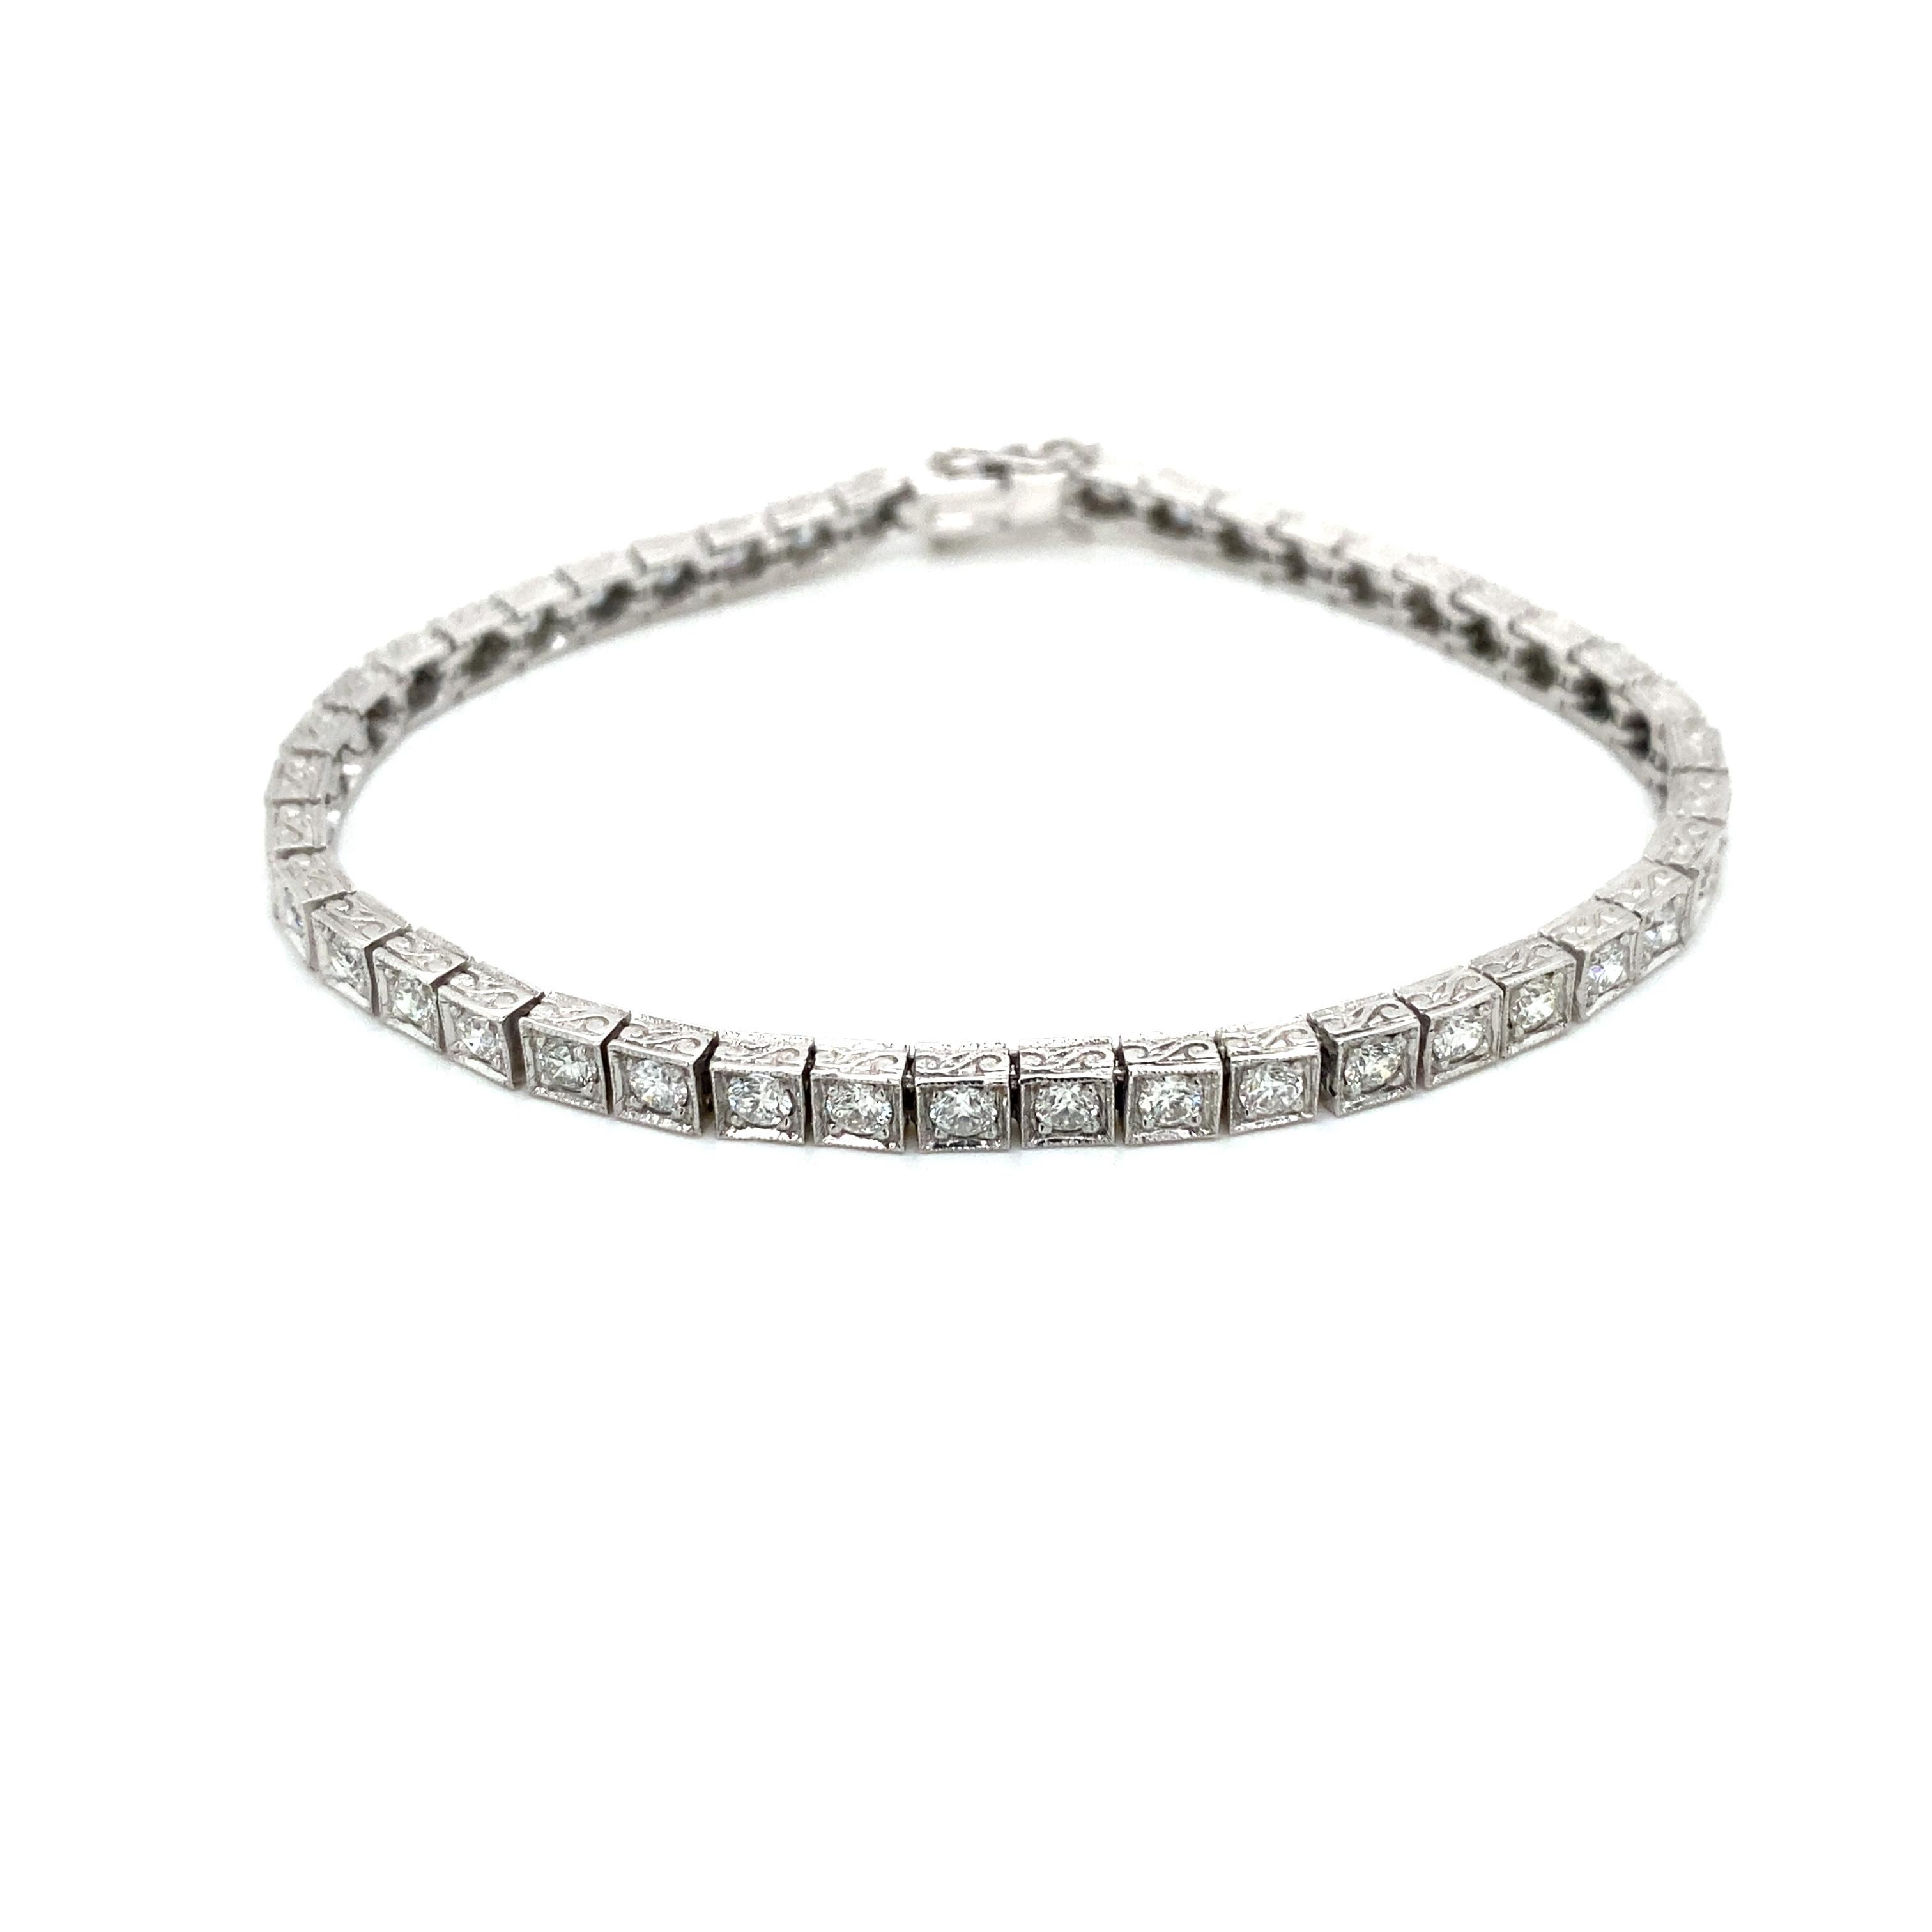 Fabulous bracelet original from 1930, a classic example of Art Deco design.

This piece is designed and crafted entirely by hand in the traditional way, using age old techniques and processes, this make it very soft and comfortable to wear.
Mounted